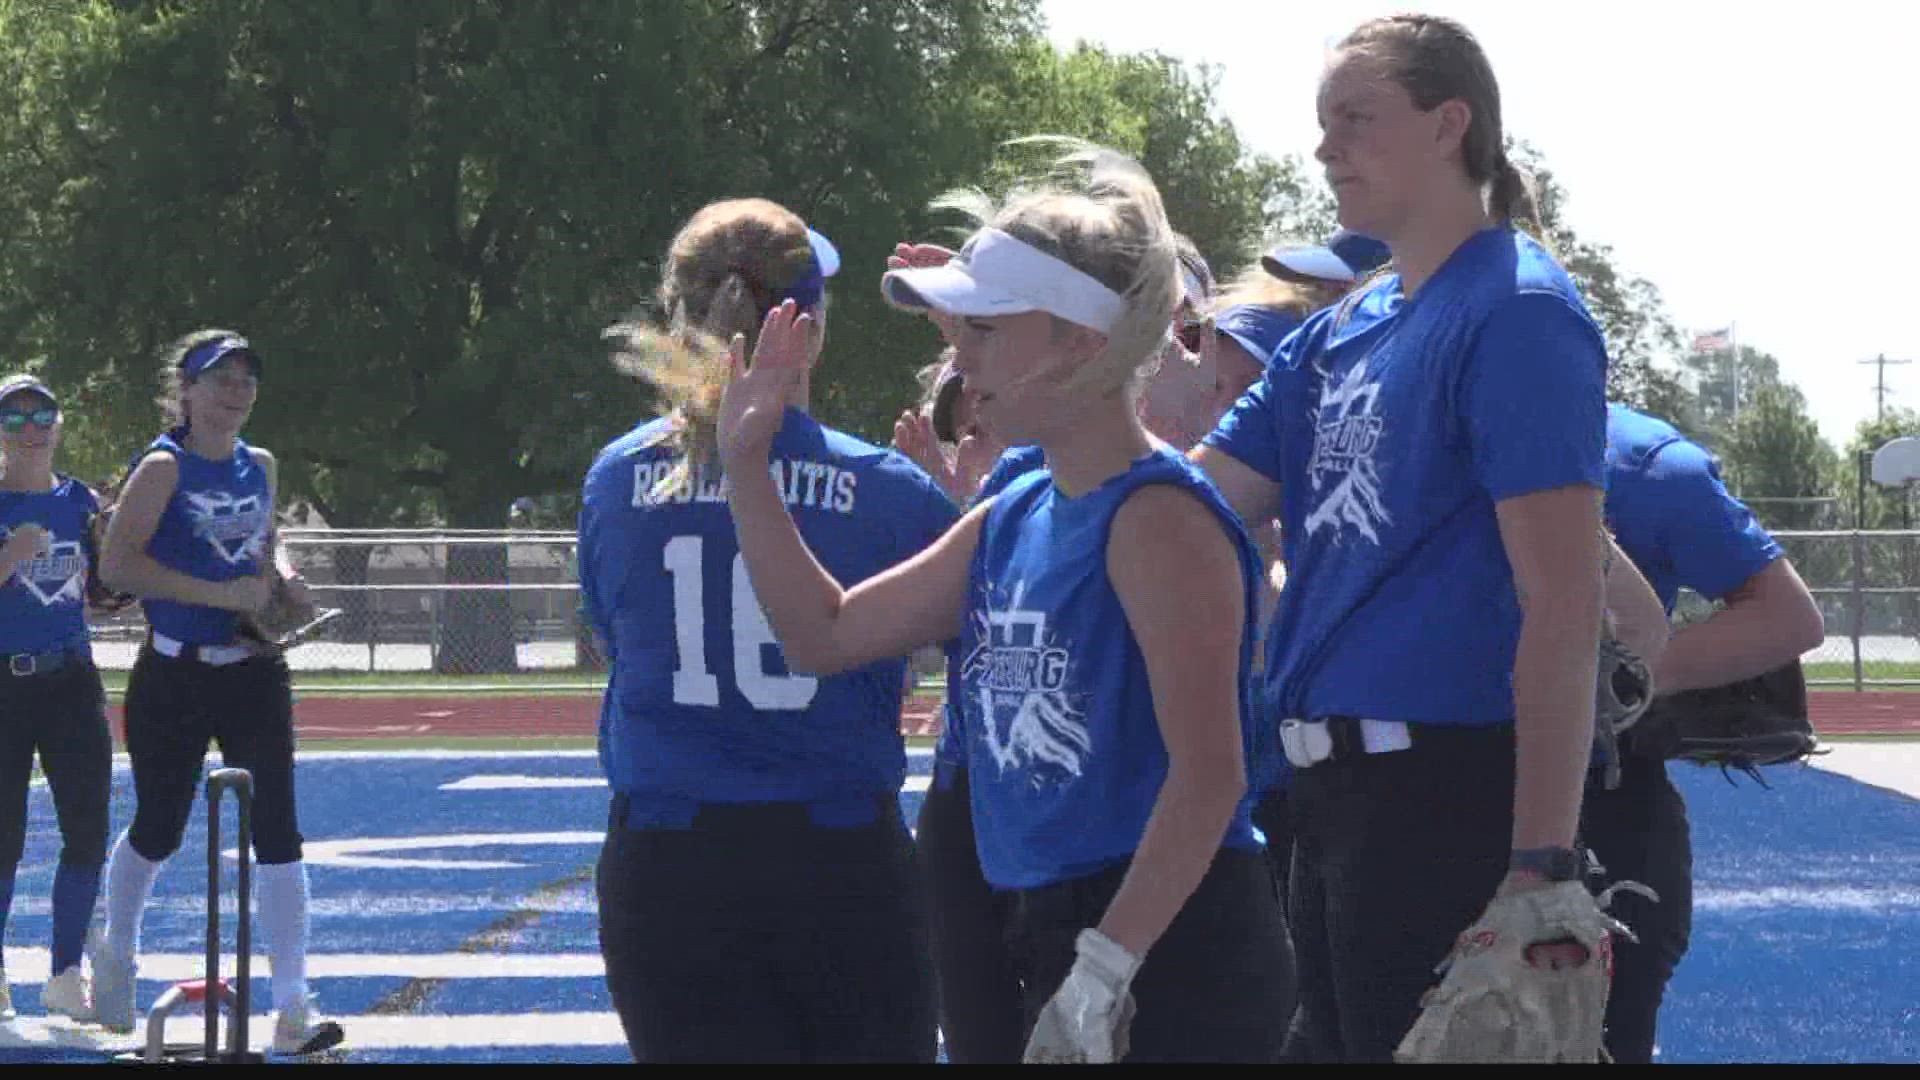 They've won 31 games in a row and have their sights set on the school's first softball state title in 37 years. Freeburg softball is having a year to remember.